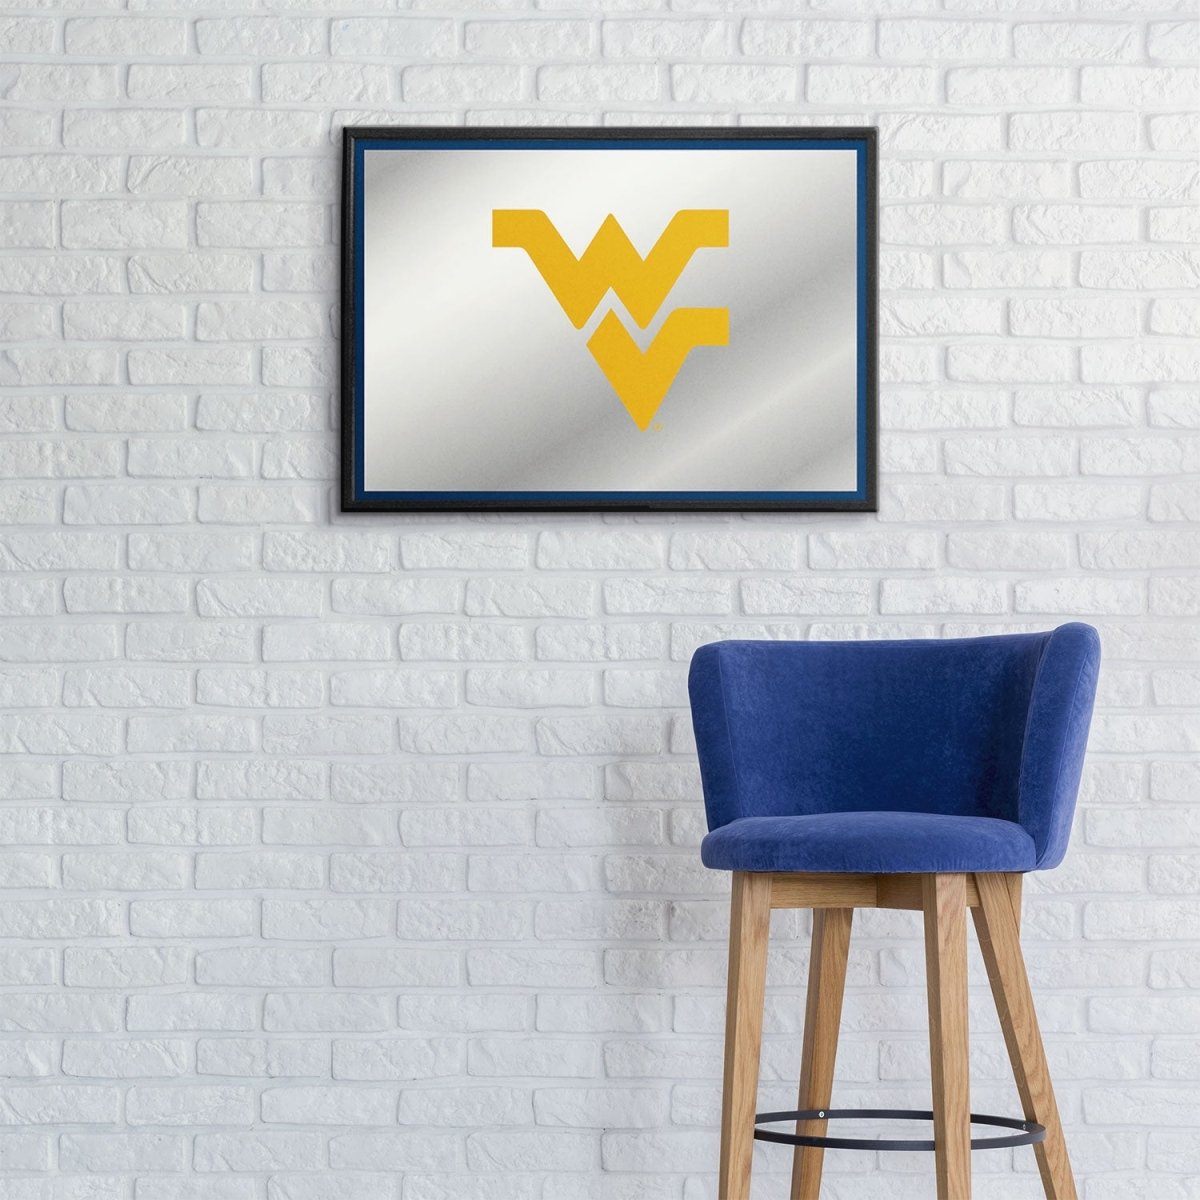 West Virginia Mountaineers: Framed Mirrored Wall Sign - The Fan-Brand